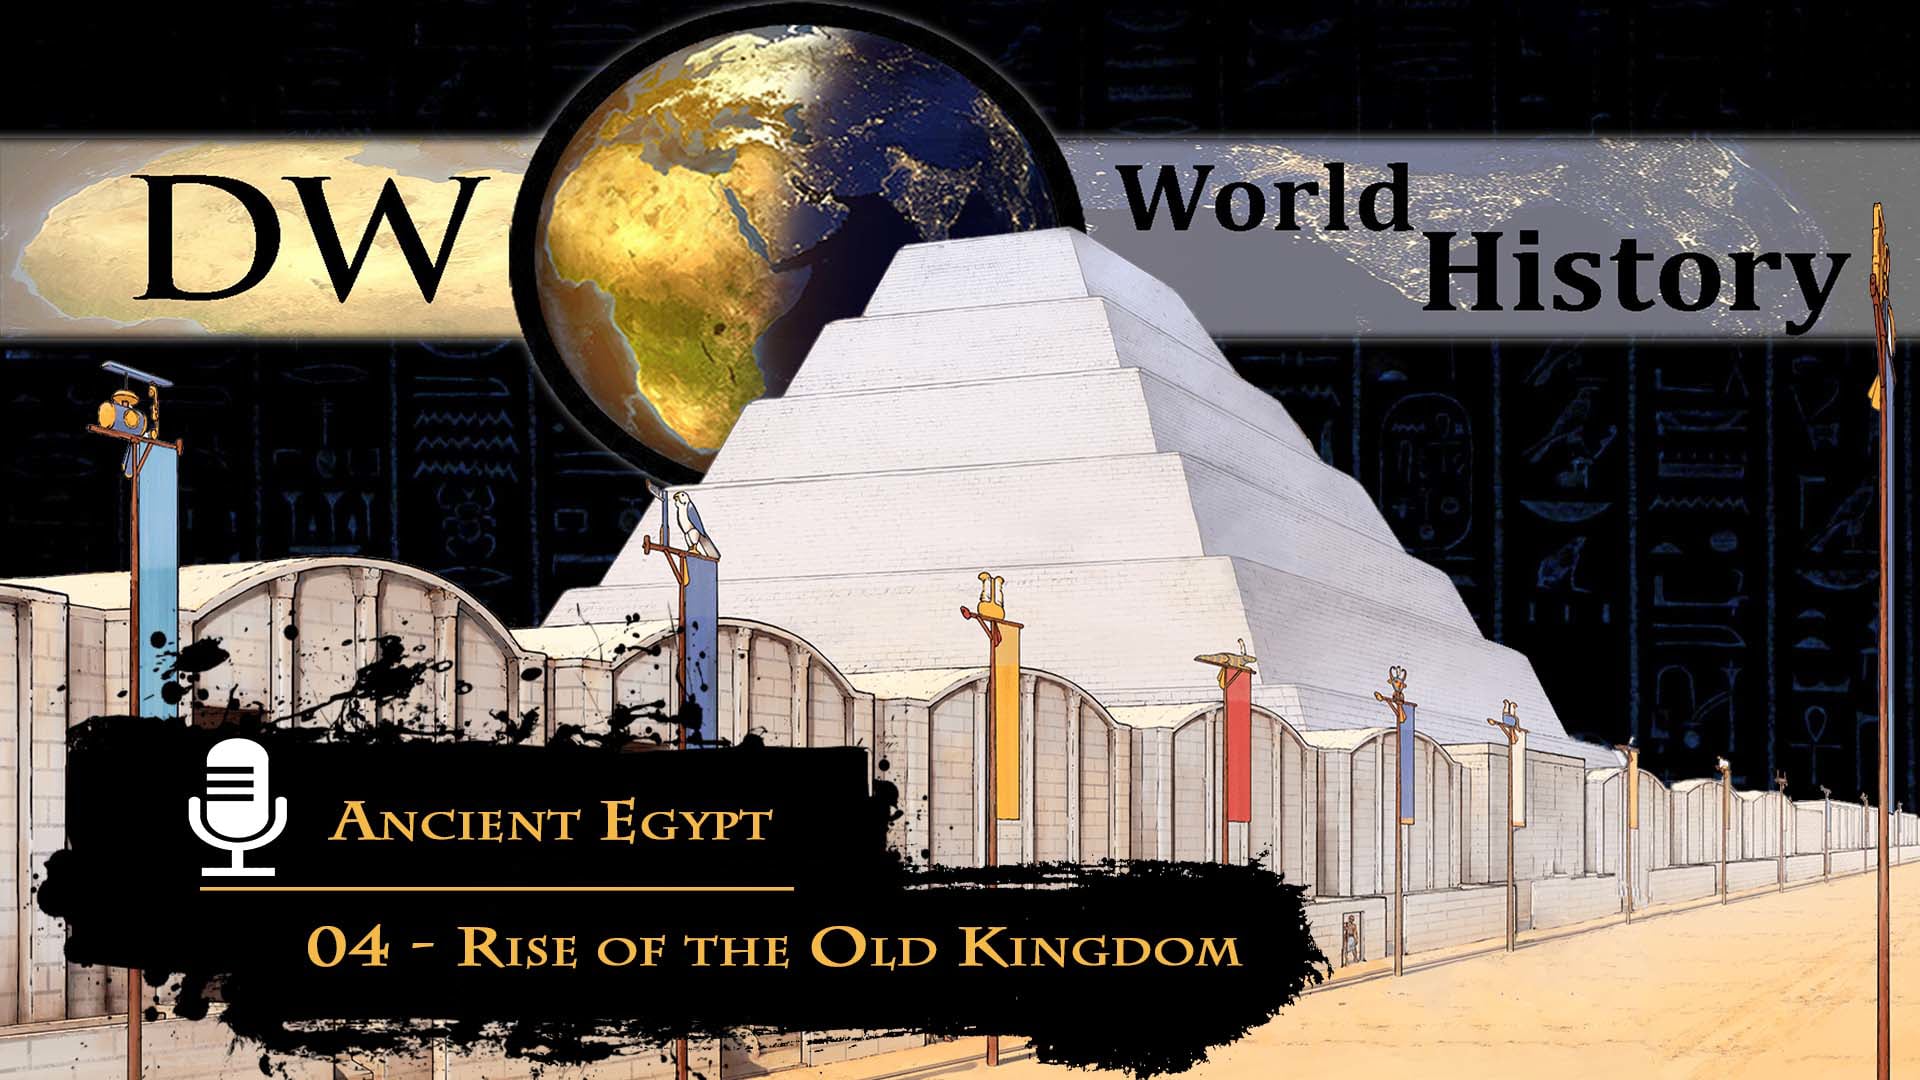 Ancient Egypt - 04 - Rise of the Old Kingdom